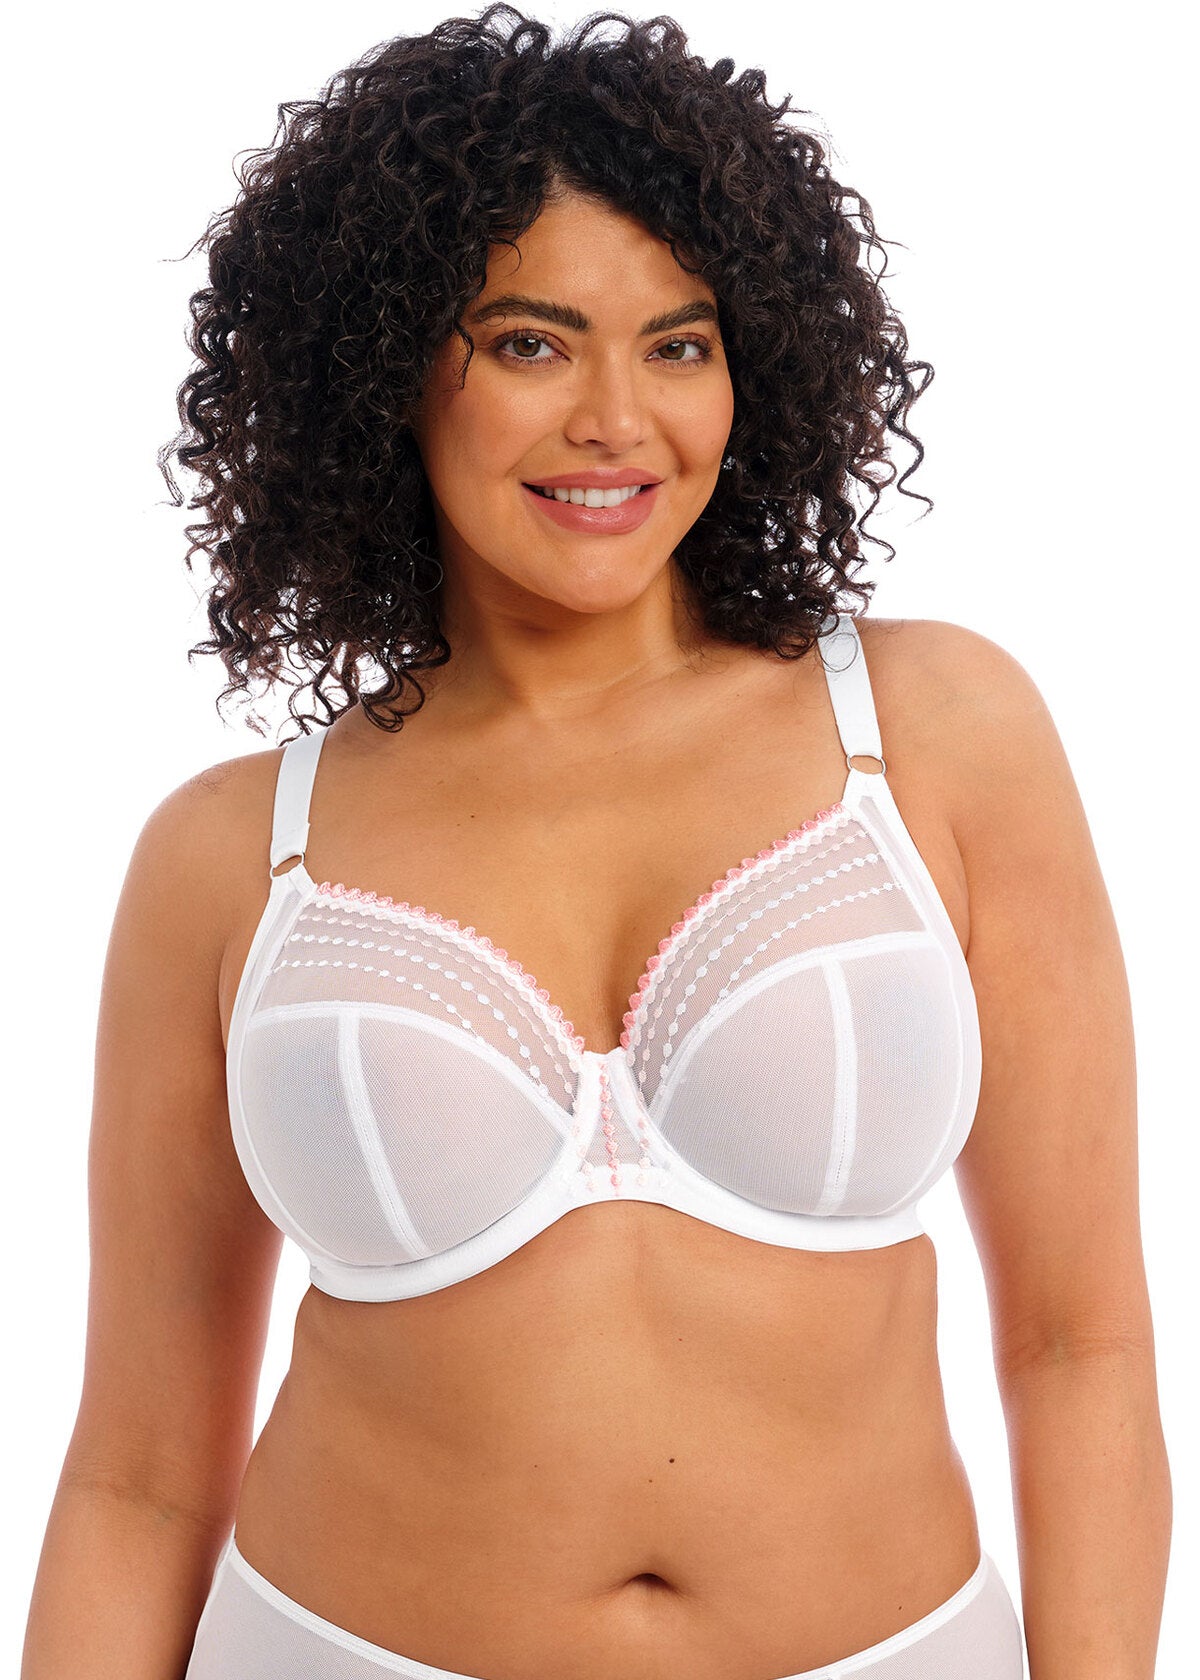 We love the Matilda bra! Shown here in - The Fitting Room